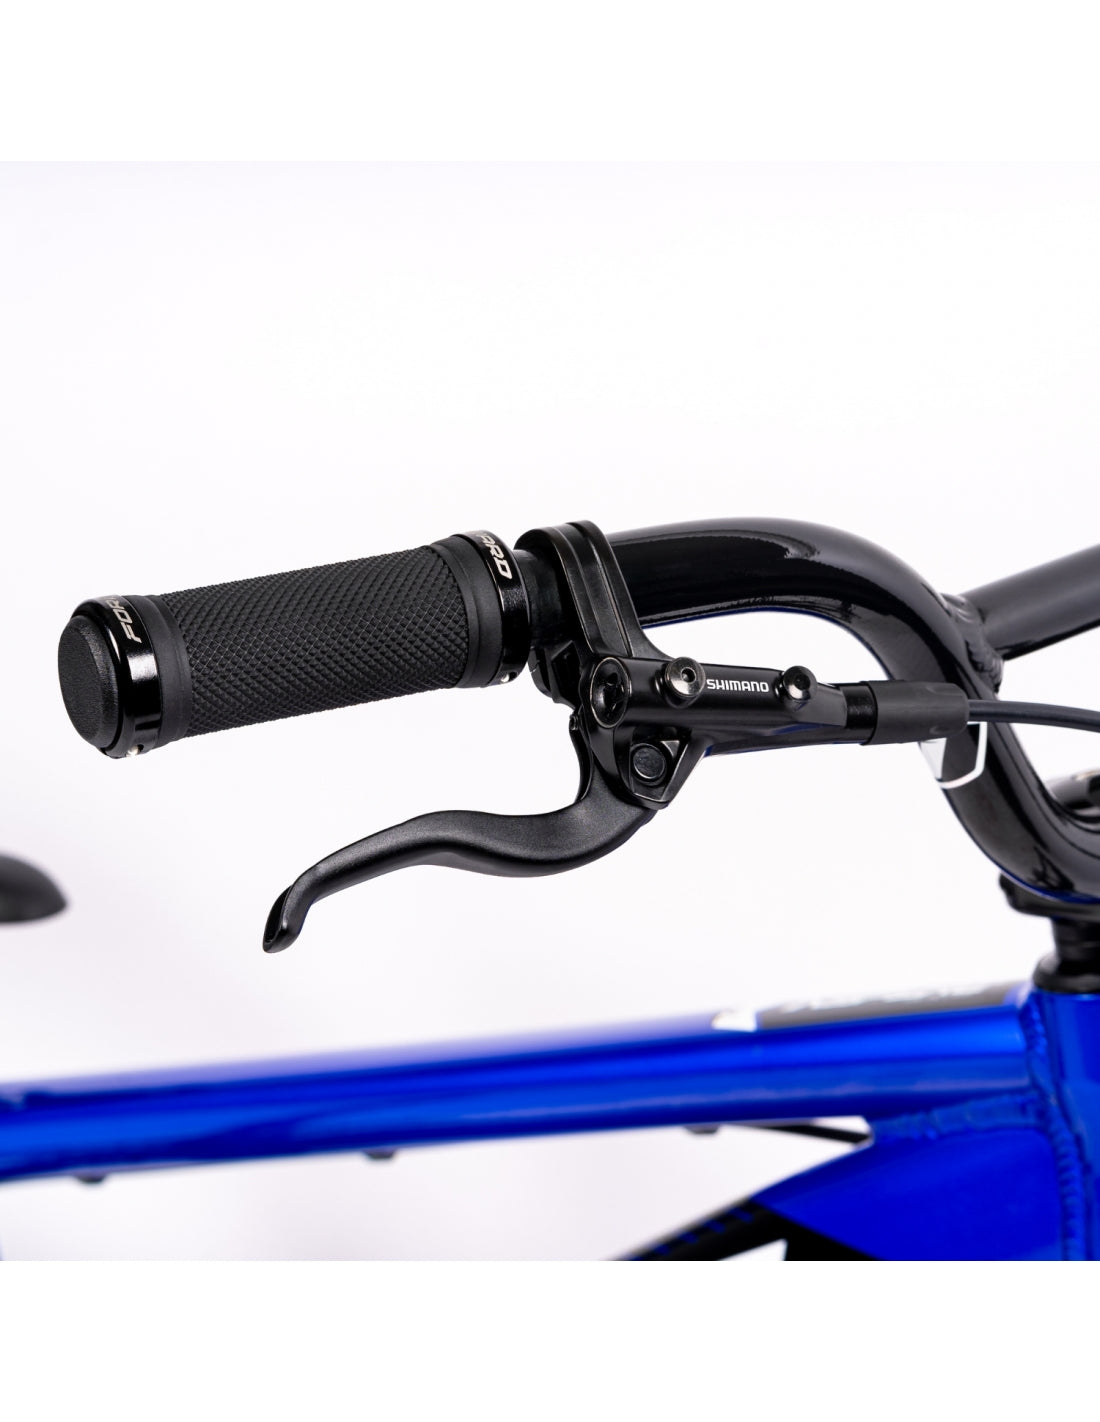 An Inspyre Evo Disc Expert Bike with a hydroformed 6061 aluminium frame, featuring a close up of its blue handlebar on a white background.